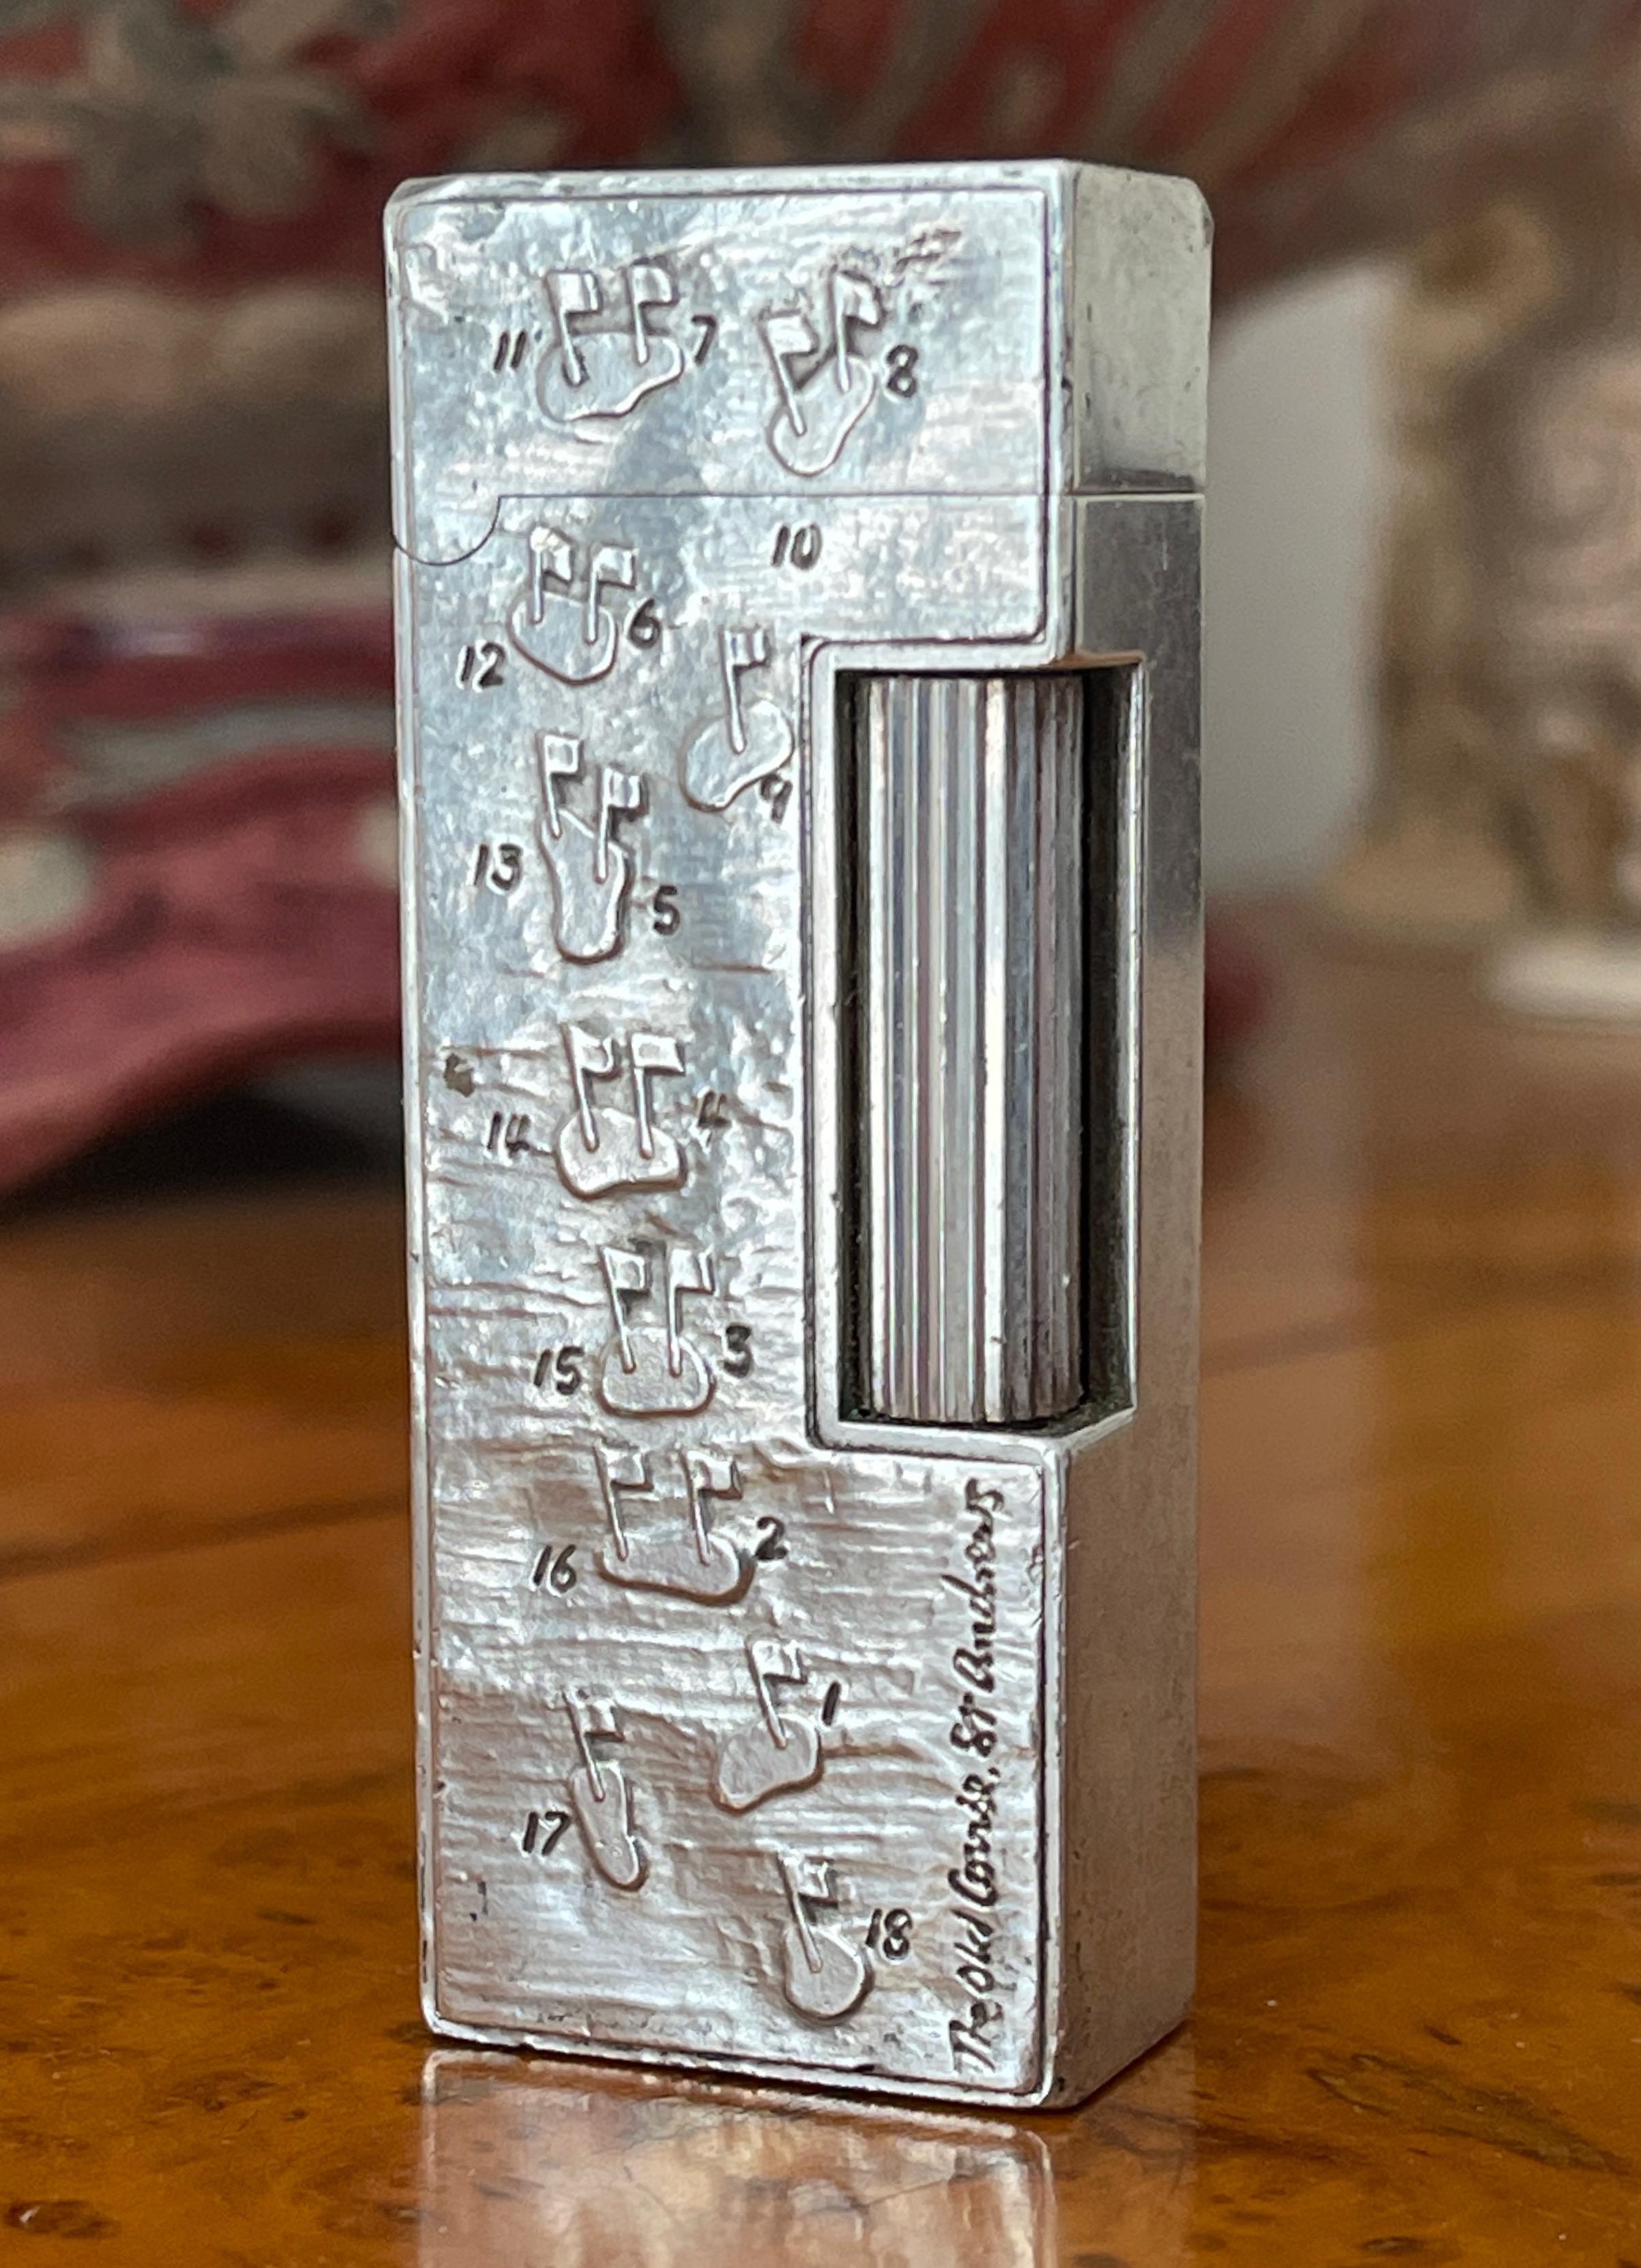 Dunhill English Silver The Old Course St Andrews Royal and Ancient Golf Club Limited Edition from their ‘Great Golf Courses Of The World’ collection rollagas butane lighter designed by Harold Riley. 
Edition 144/288 with a city stamp of London,